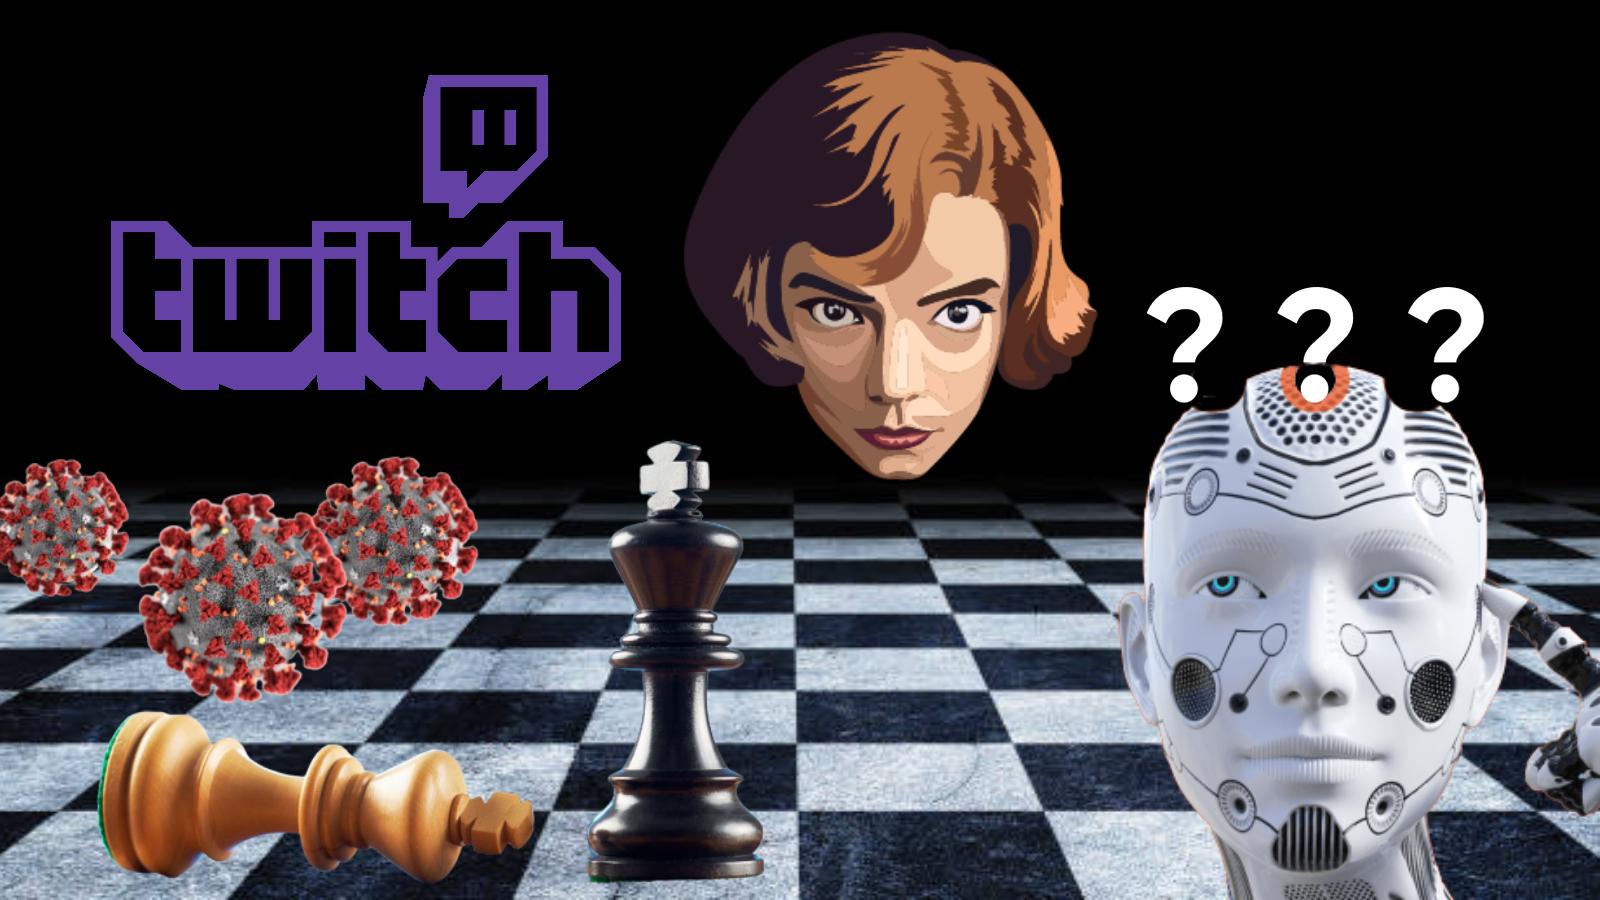 chess24 - Channel Streams on Twitch: Viewers, Followers, Air Time